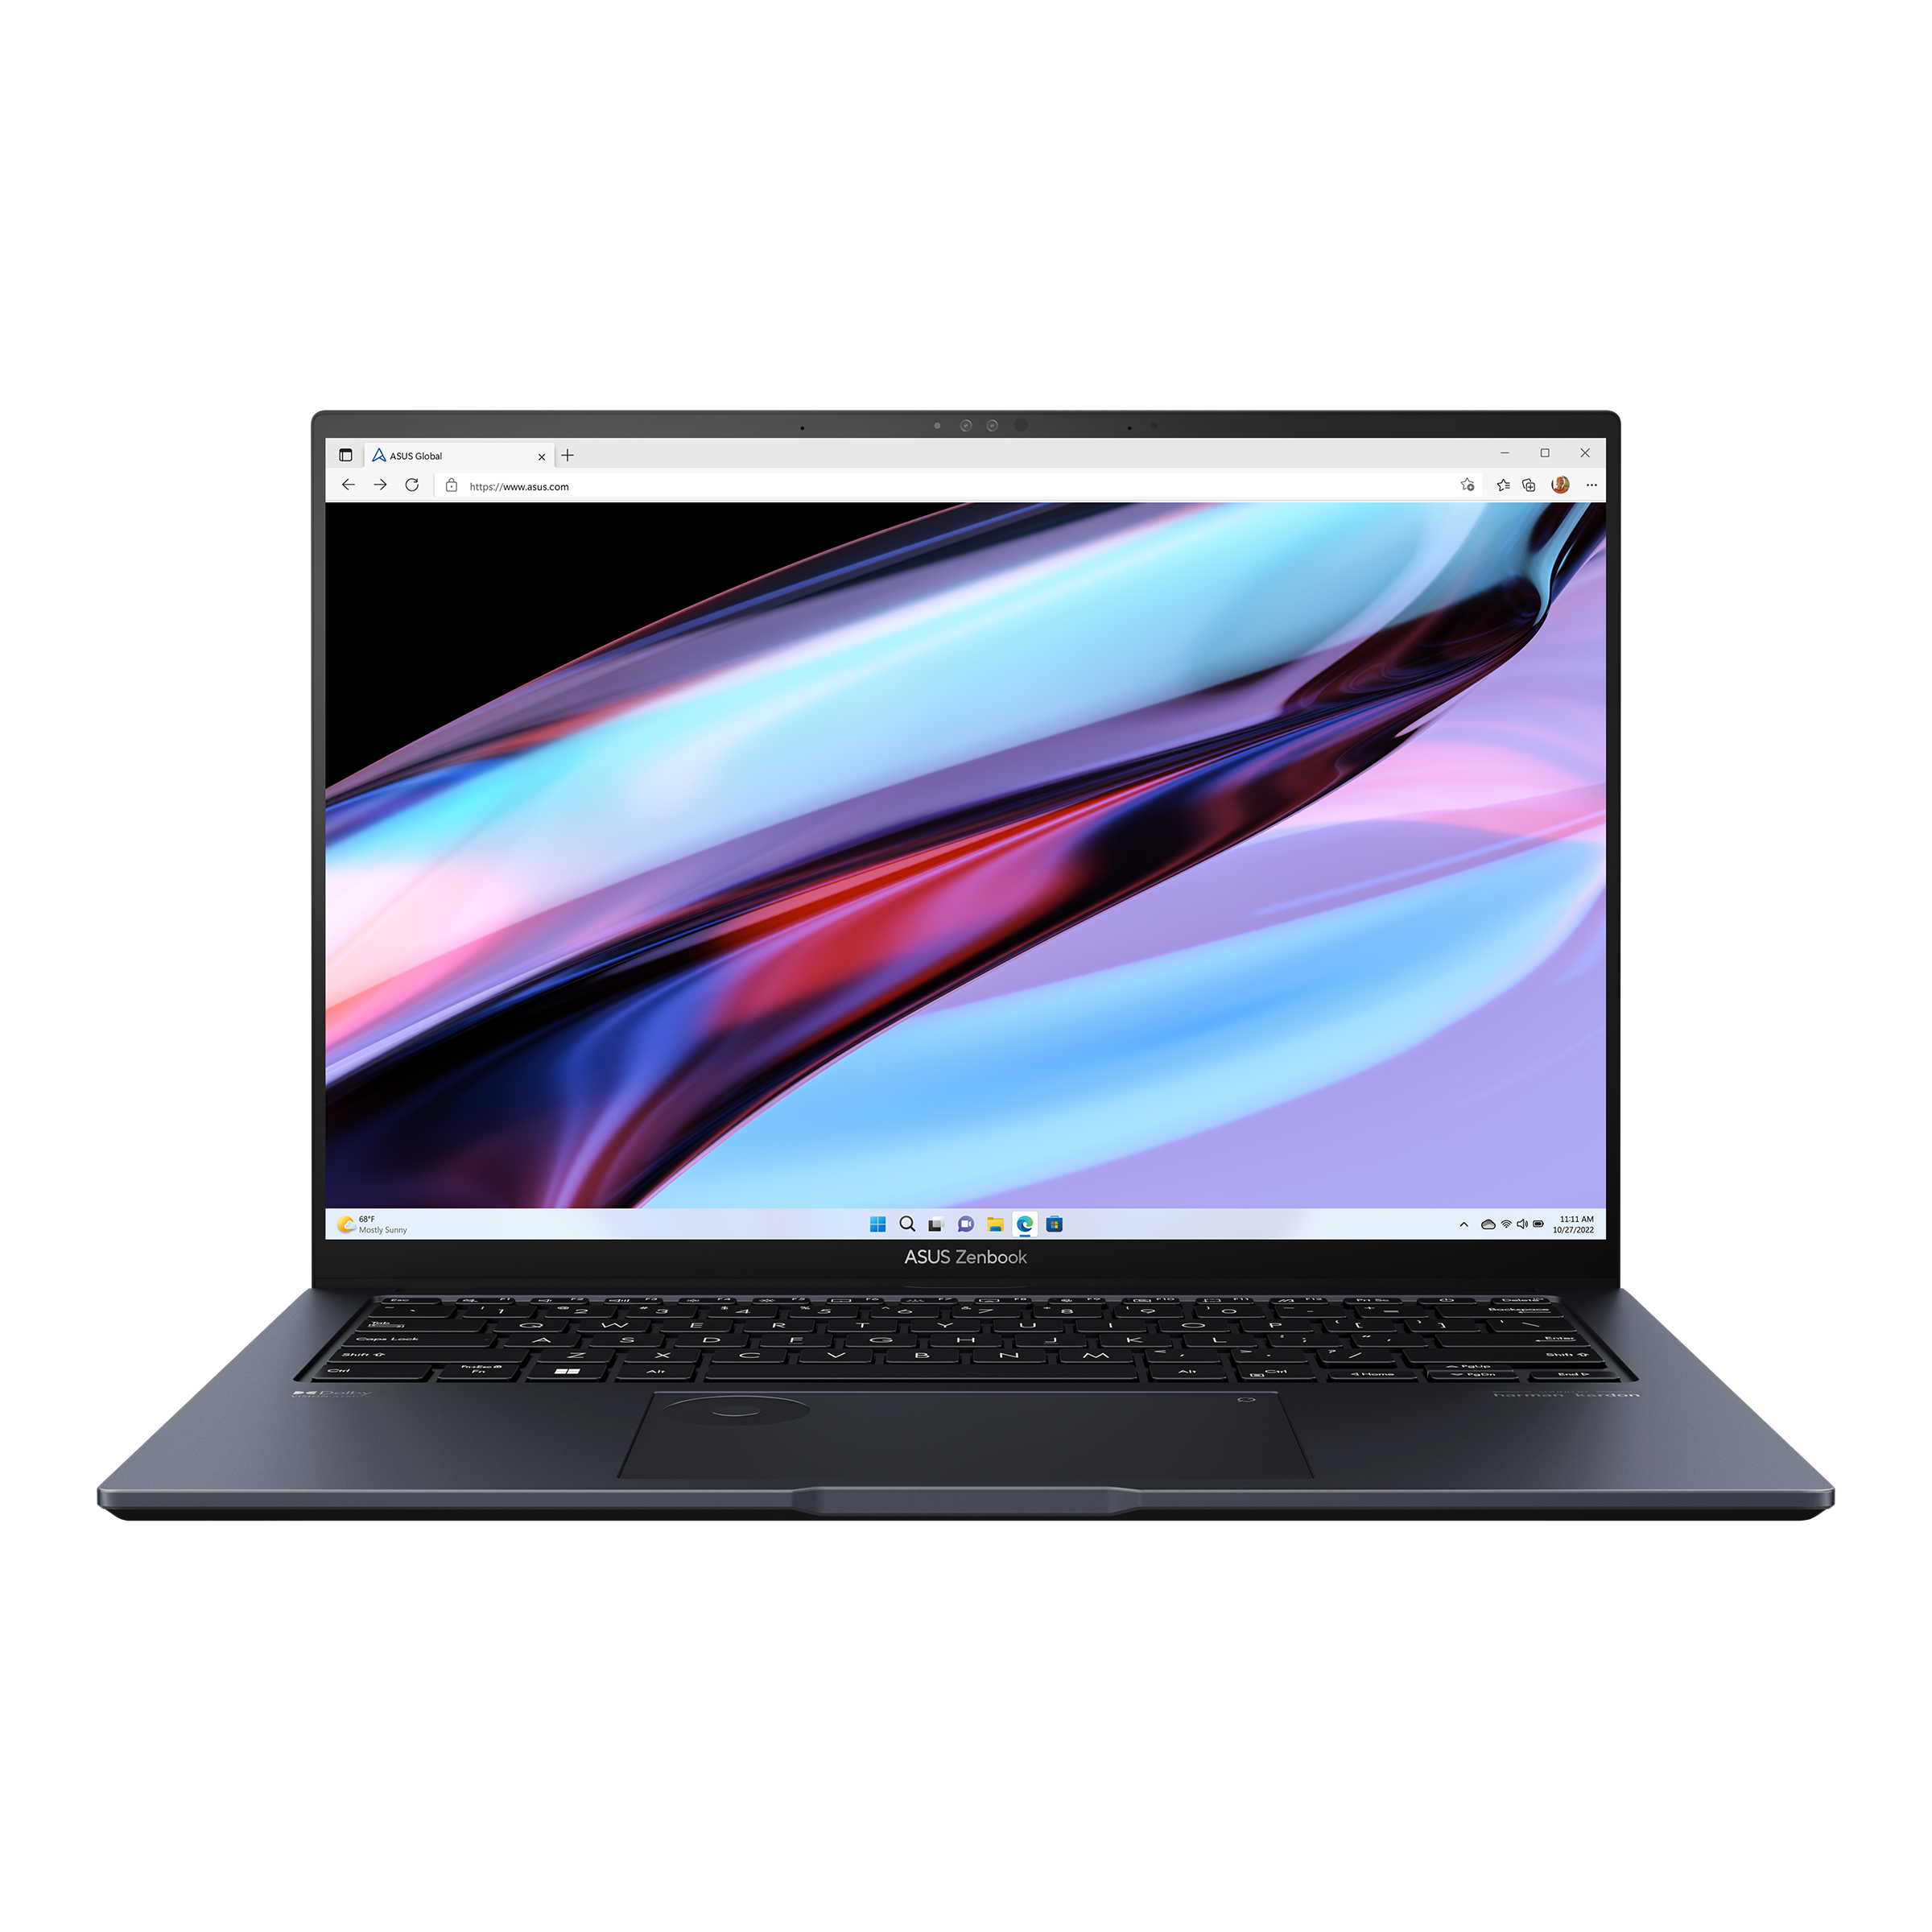 Asus Zenbook 14 OLED joins the AI PC party with Intel Core Ultra 7, Arc GPU